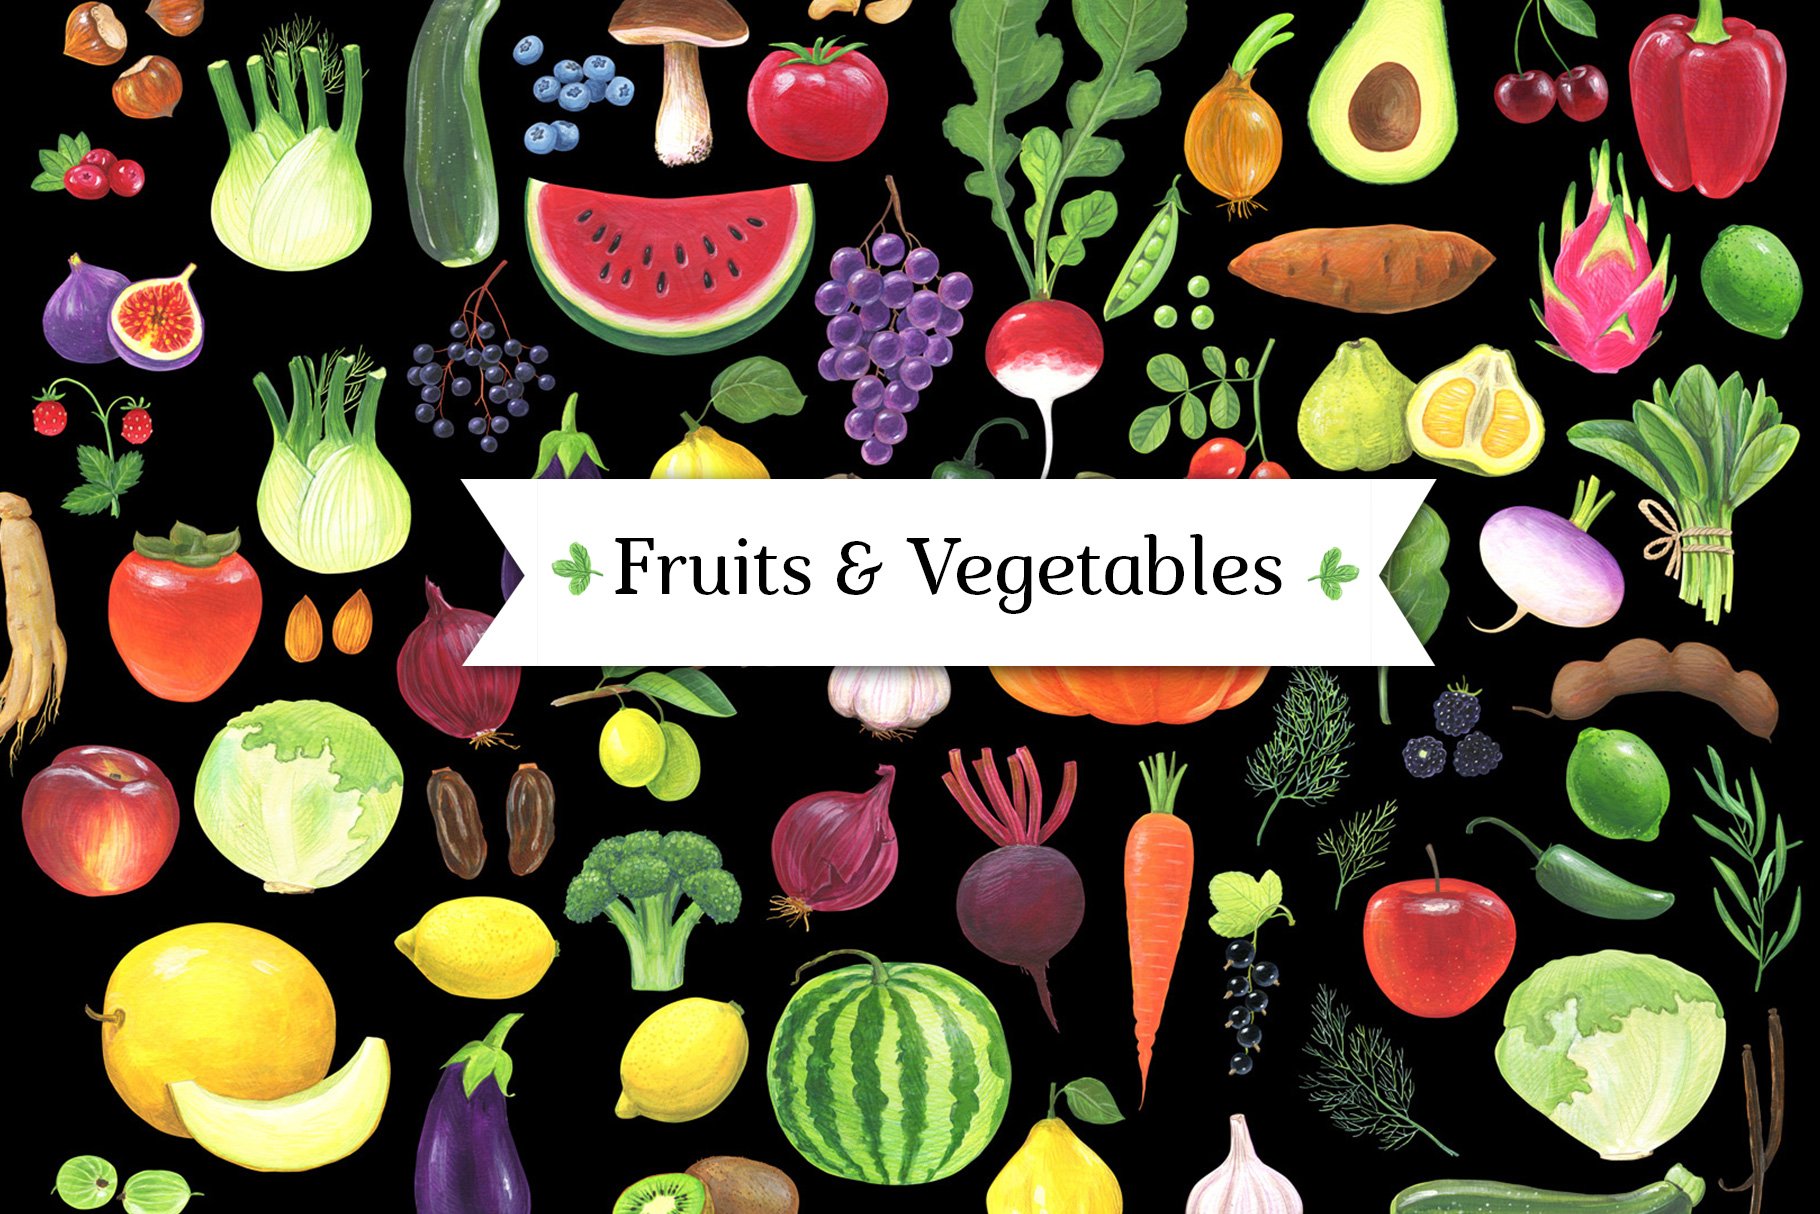 Fruits and Vegetables set cover image.